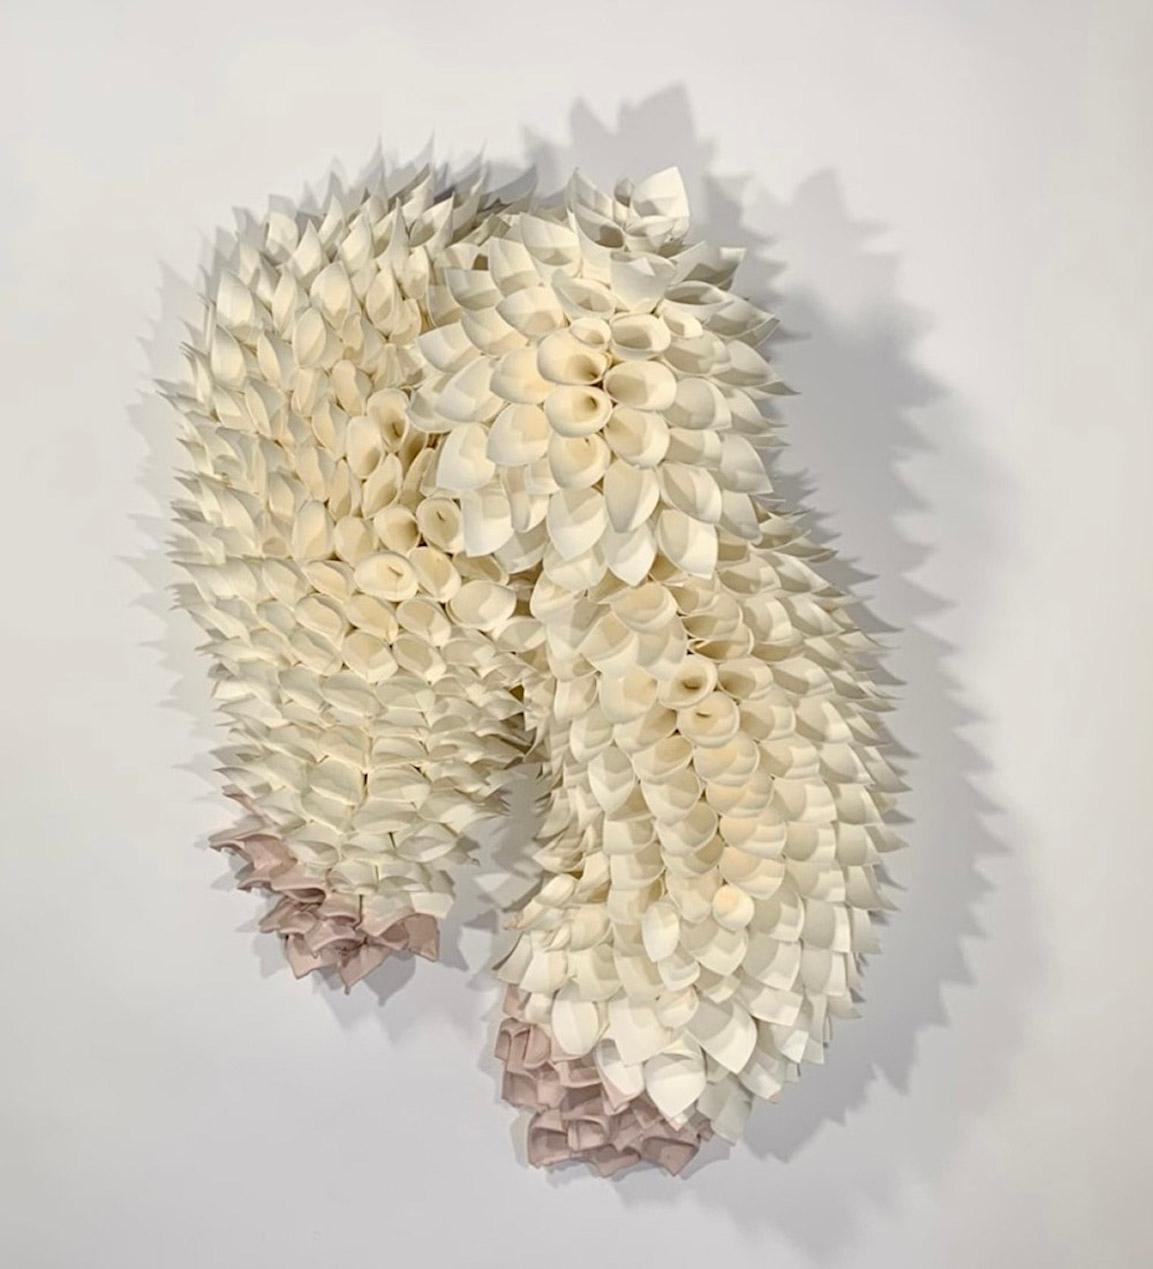 Samuelle Green Abstract Sculpture - Paper Sculpture, Wall Hanging: Untitled Ivory and Pink Dip'